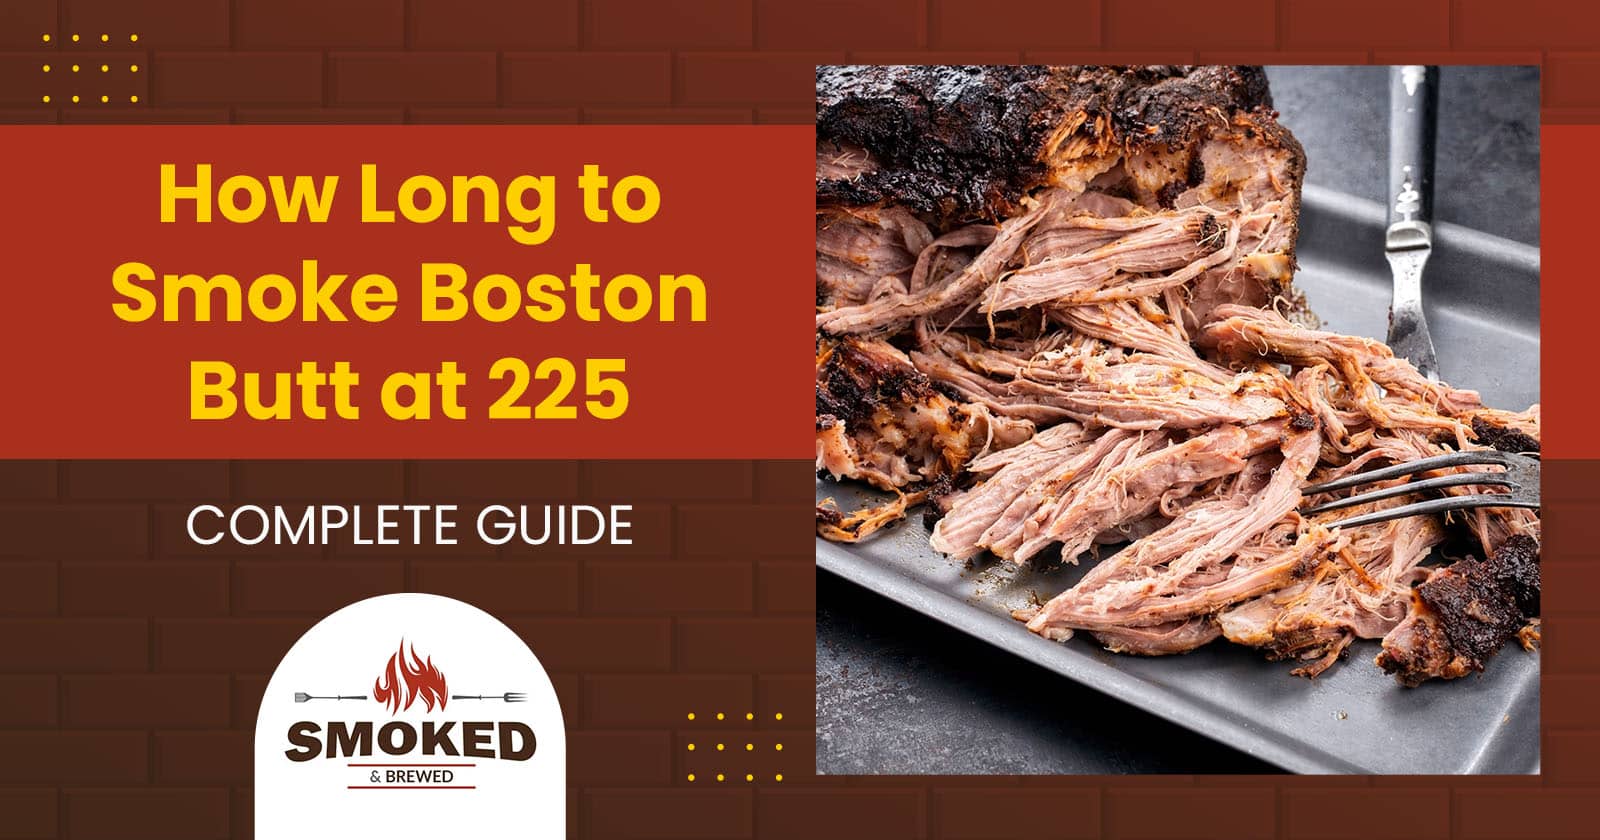 How Long to Smoke Boston Butt at 225 [COMPLETE GUIDE]